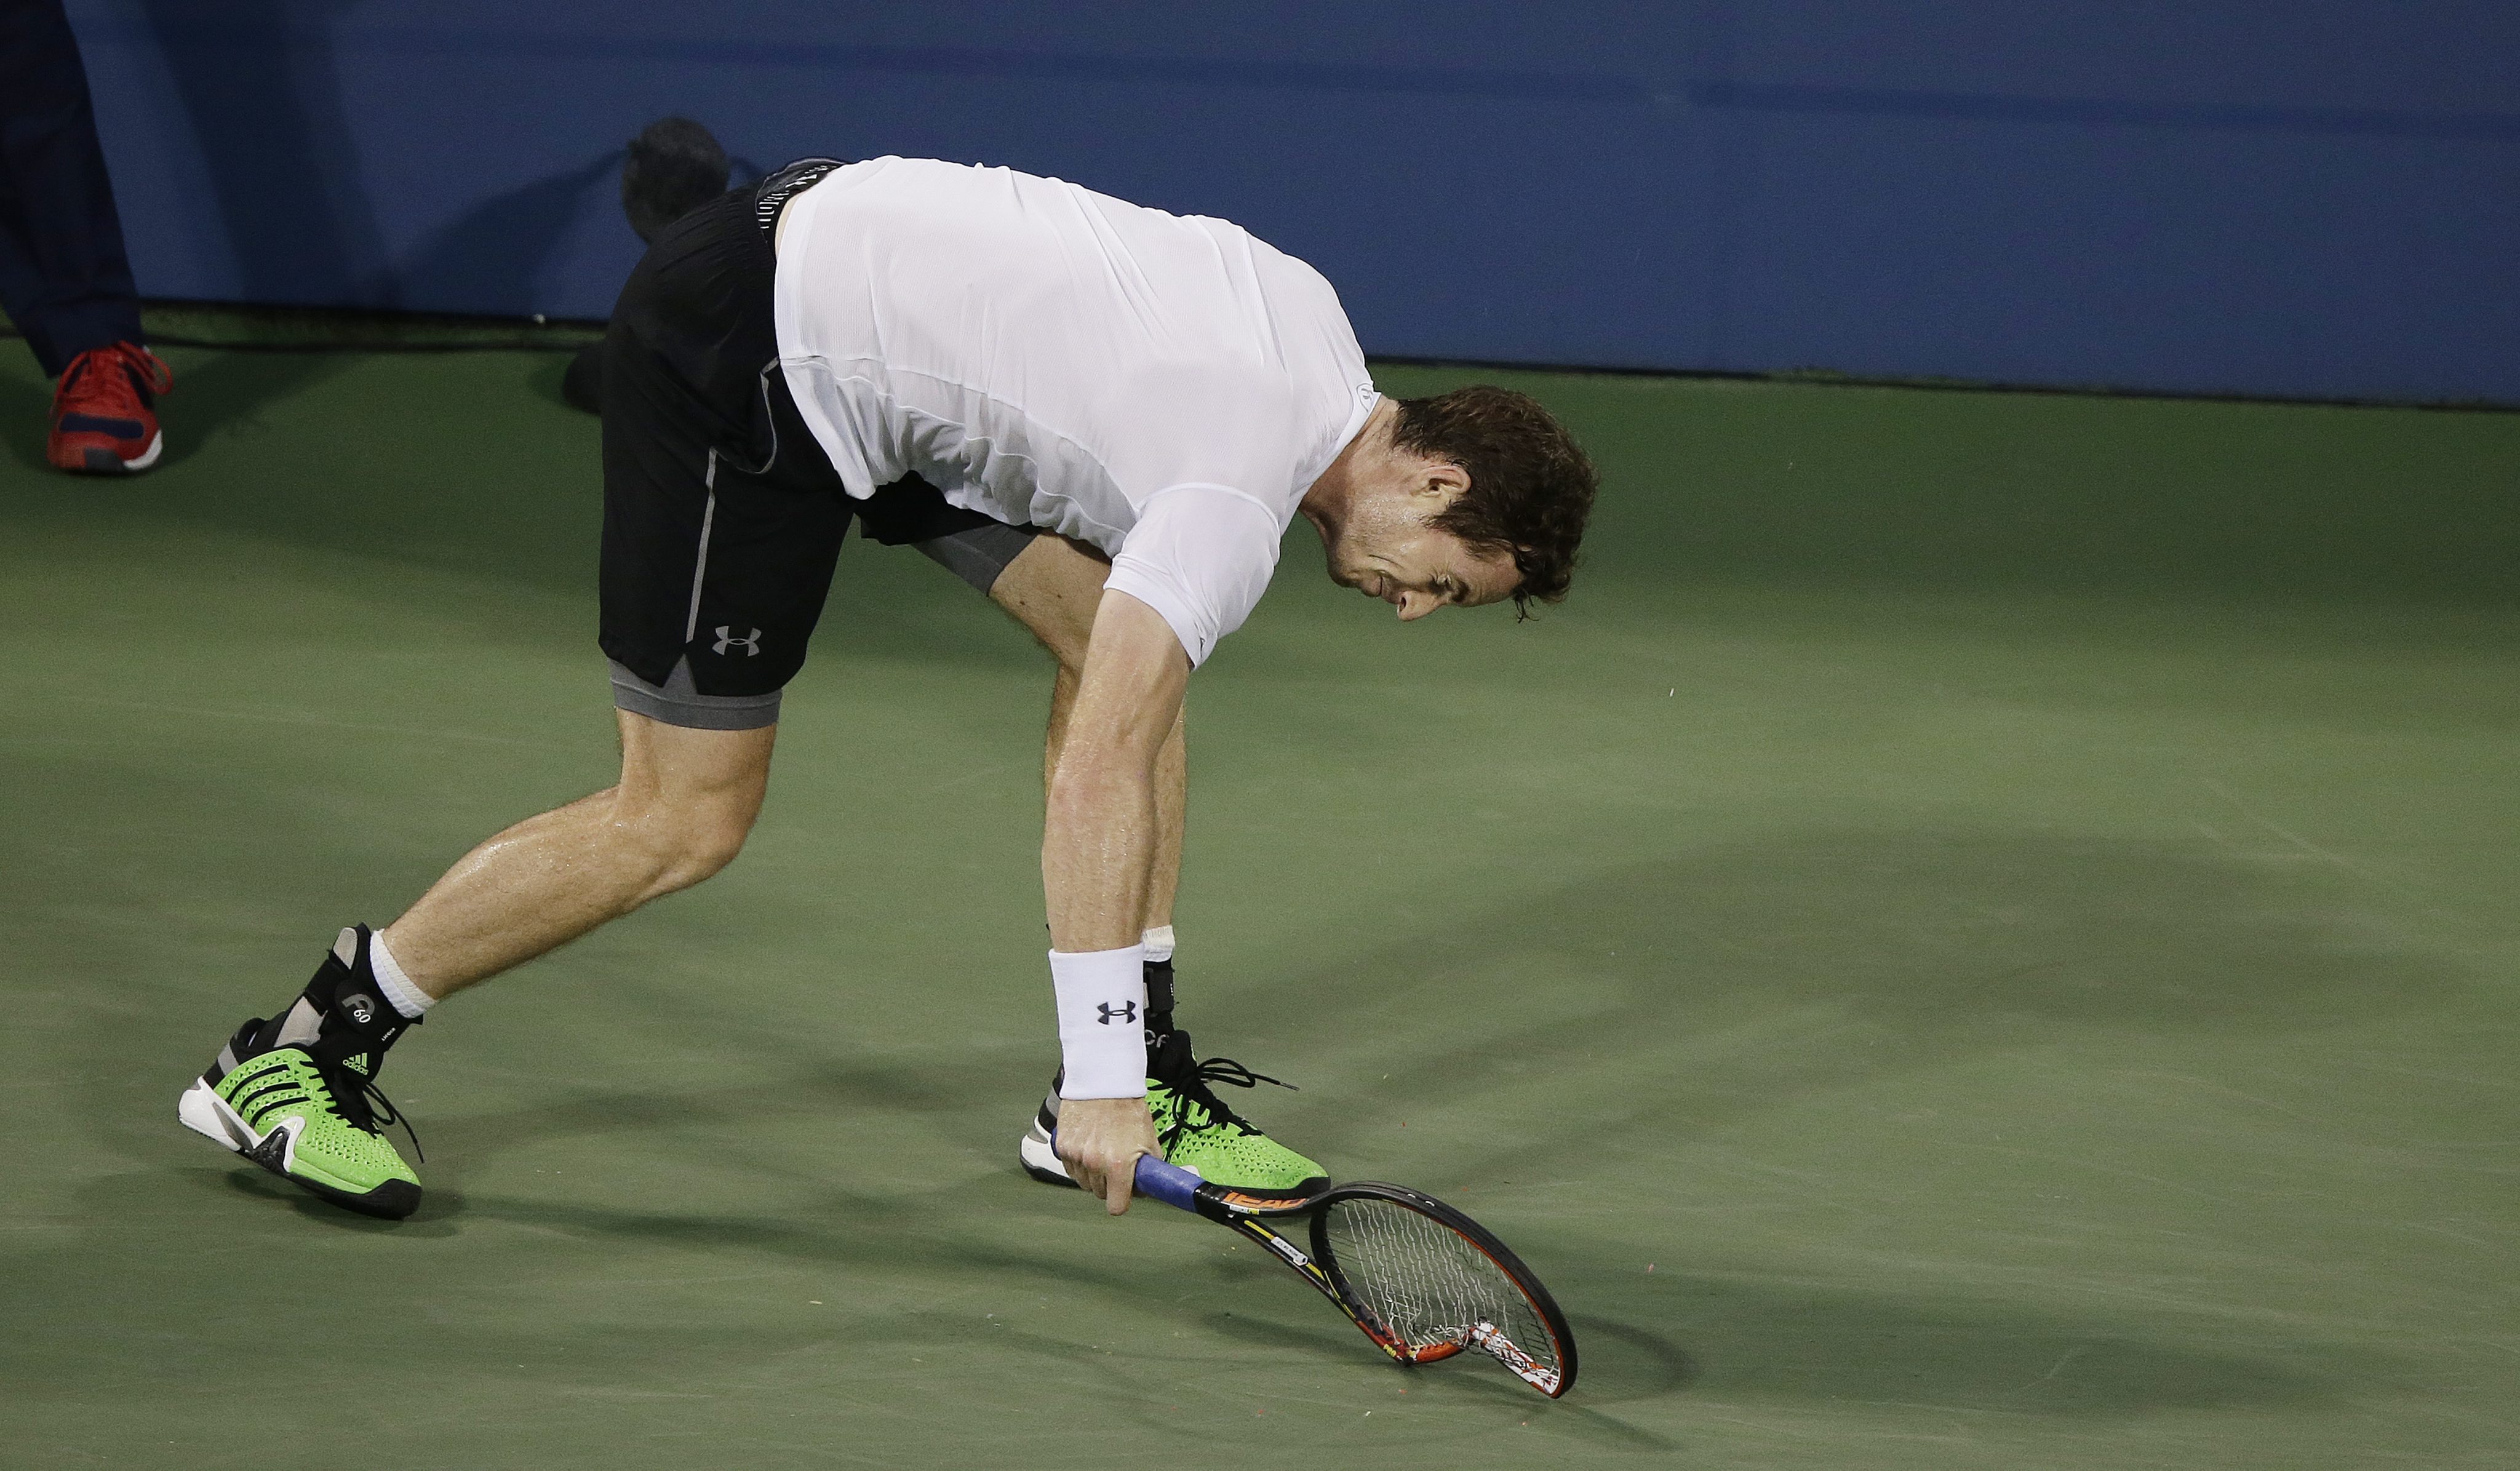 Andy Murray smashes his racquet in frustration after losing a point to Kevin Anderson during their fourth round match. Photo: EPA